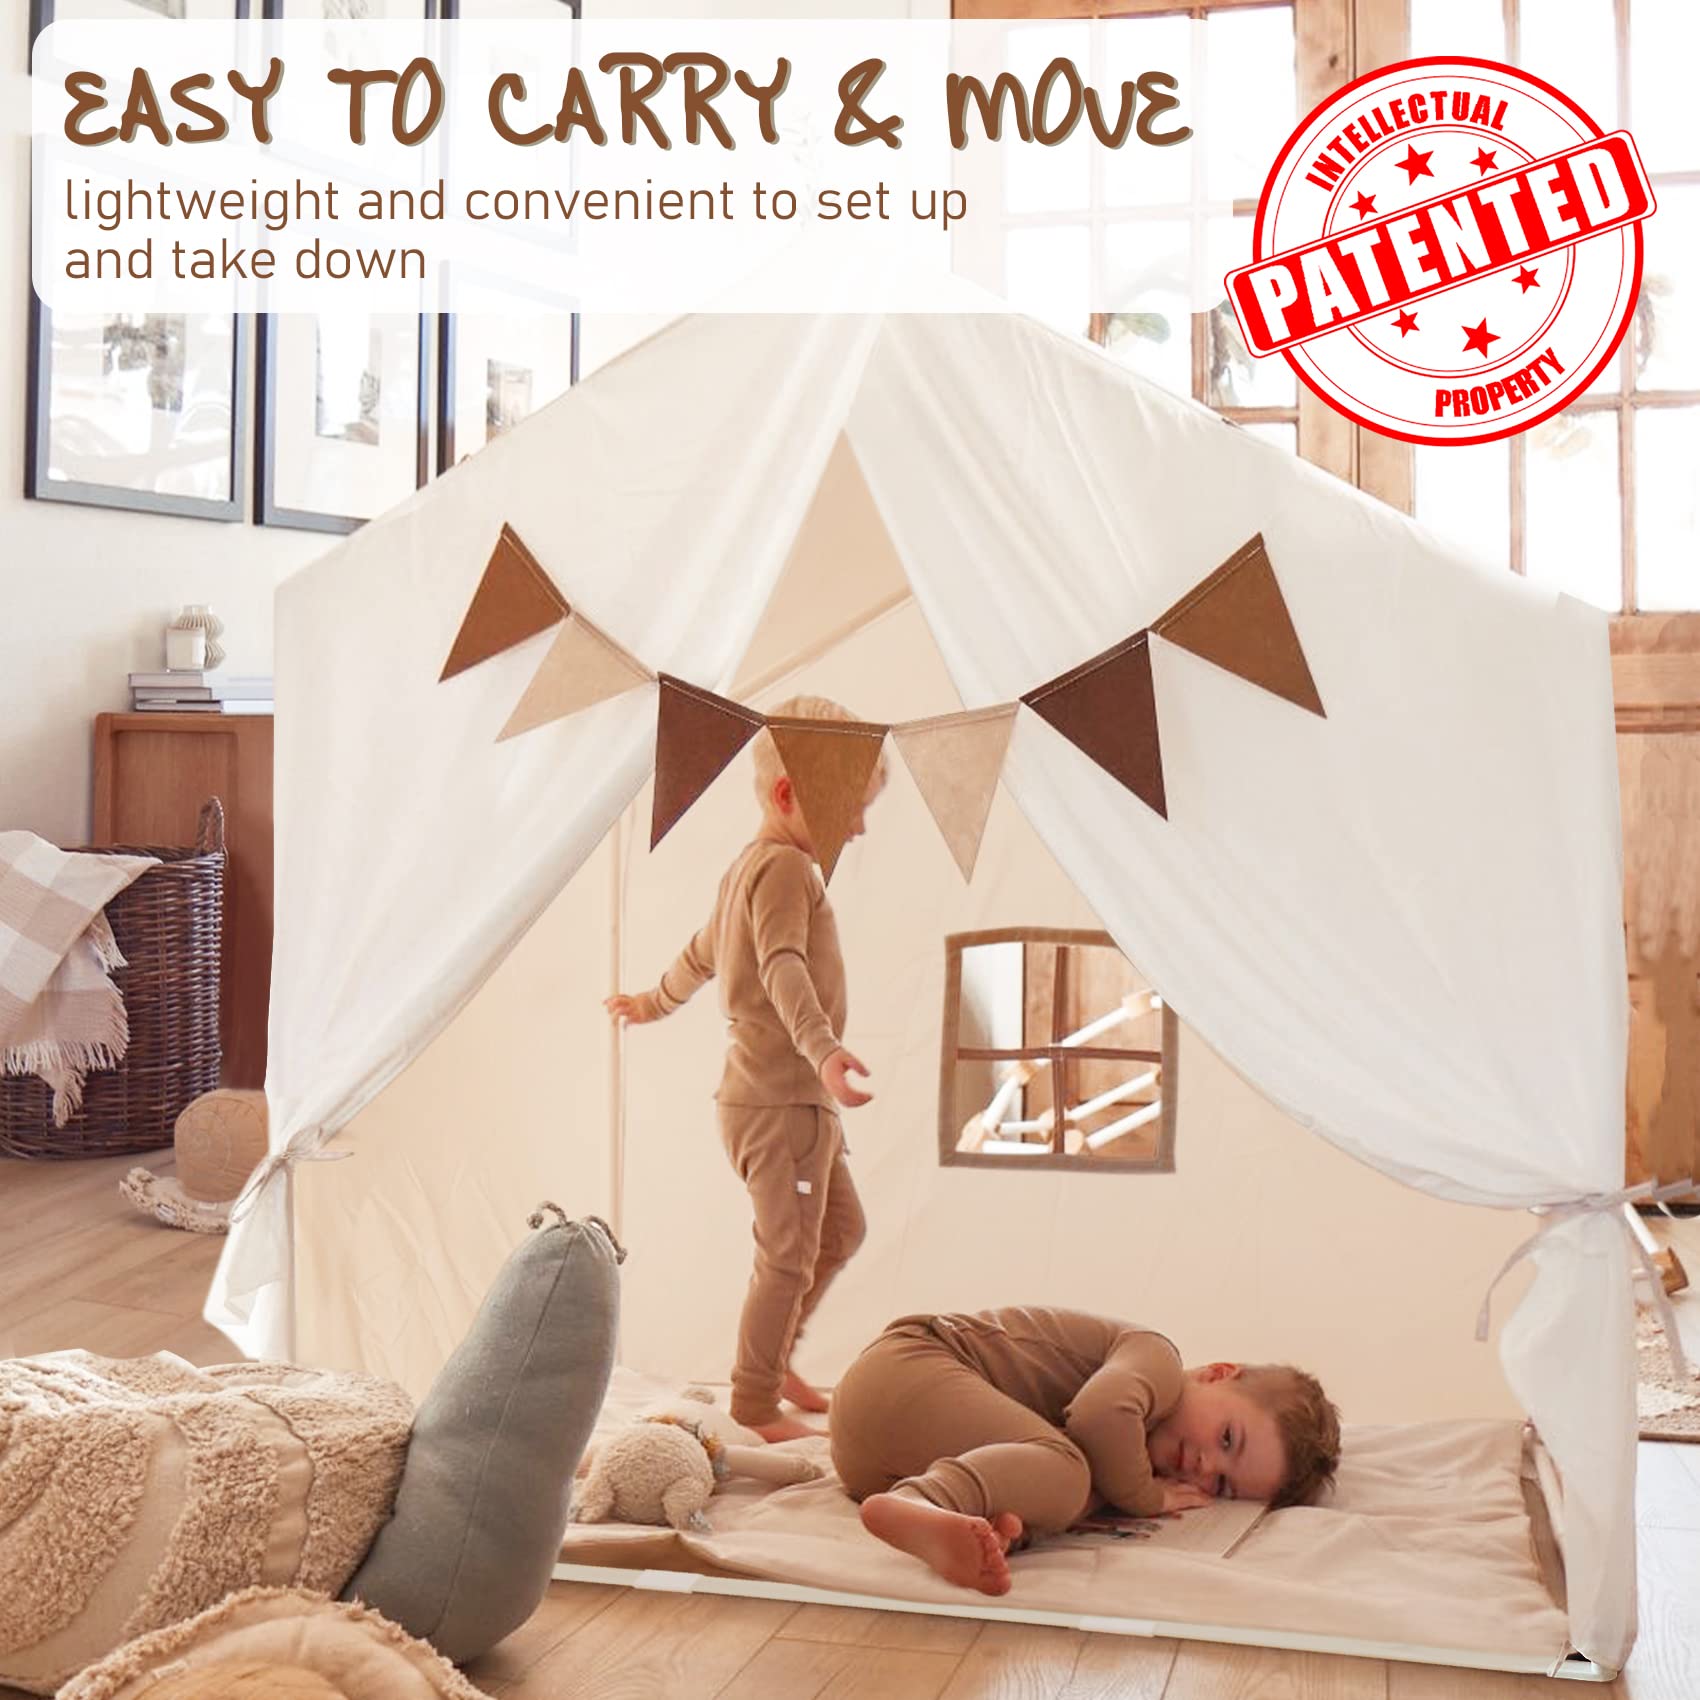 Large Kids Tent, Kids Playhouse with Banner,Light and Floor Piece, Tent for Kids Reading Nook, Playing, Enjoying, Easy to Assemble and Wash, Indoor and Outdoor, Boho Adult Tent, 52x35x51